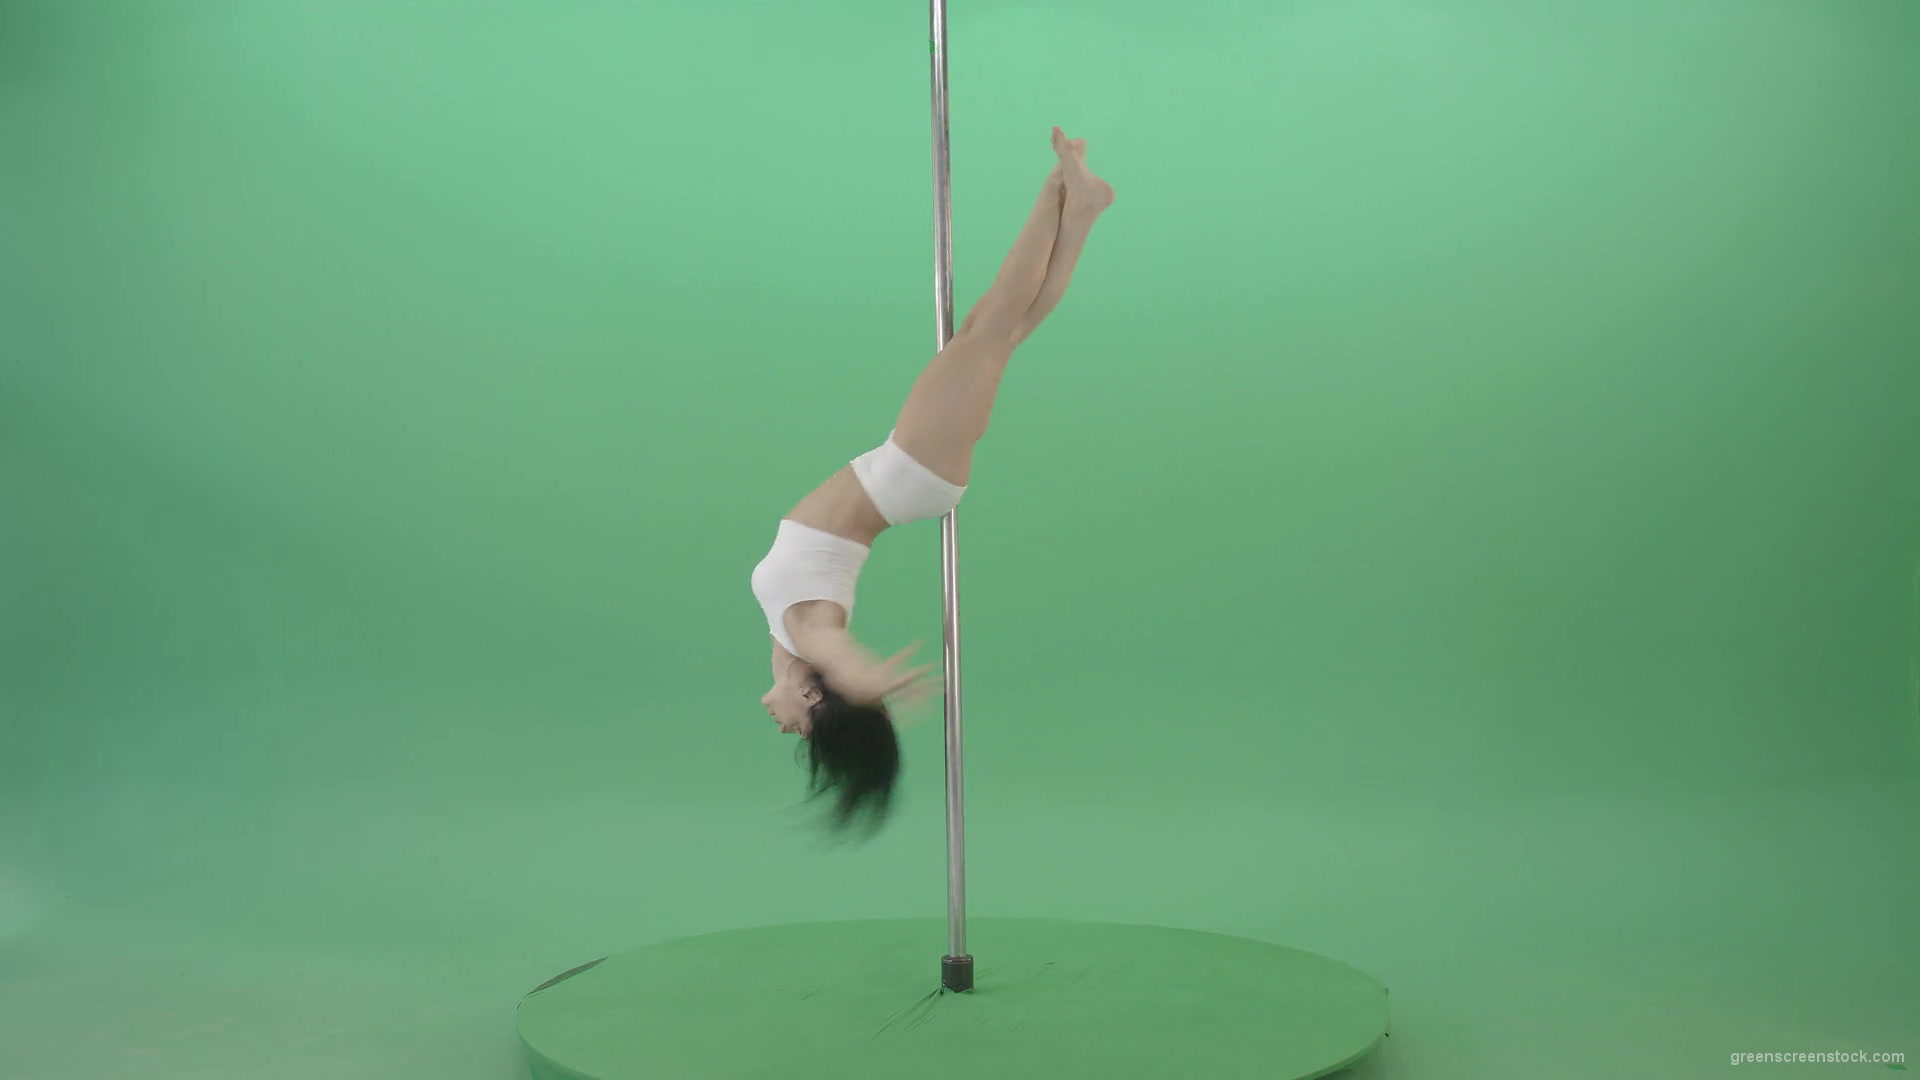 Sport-Fit-Girl-spinning-on-pole-making-acrobatic-element-on-green-screen-1920_005 Green Screen Stock